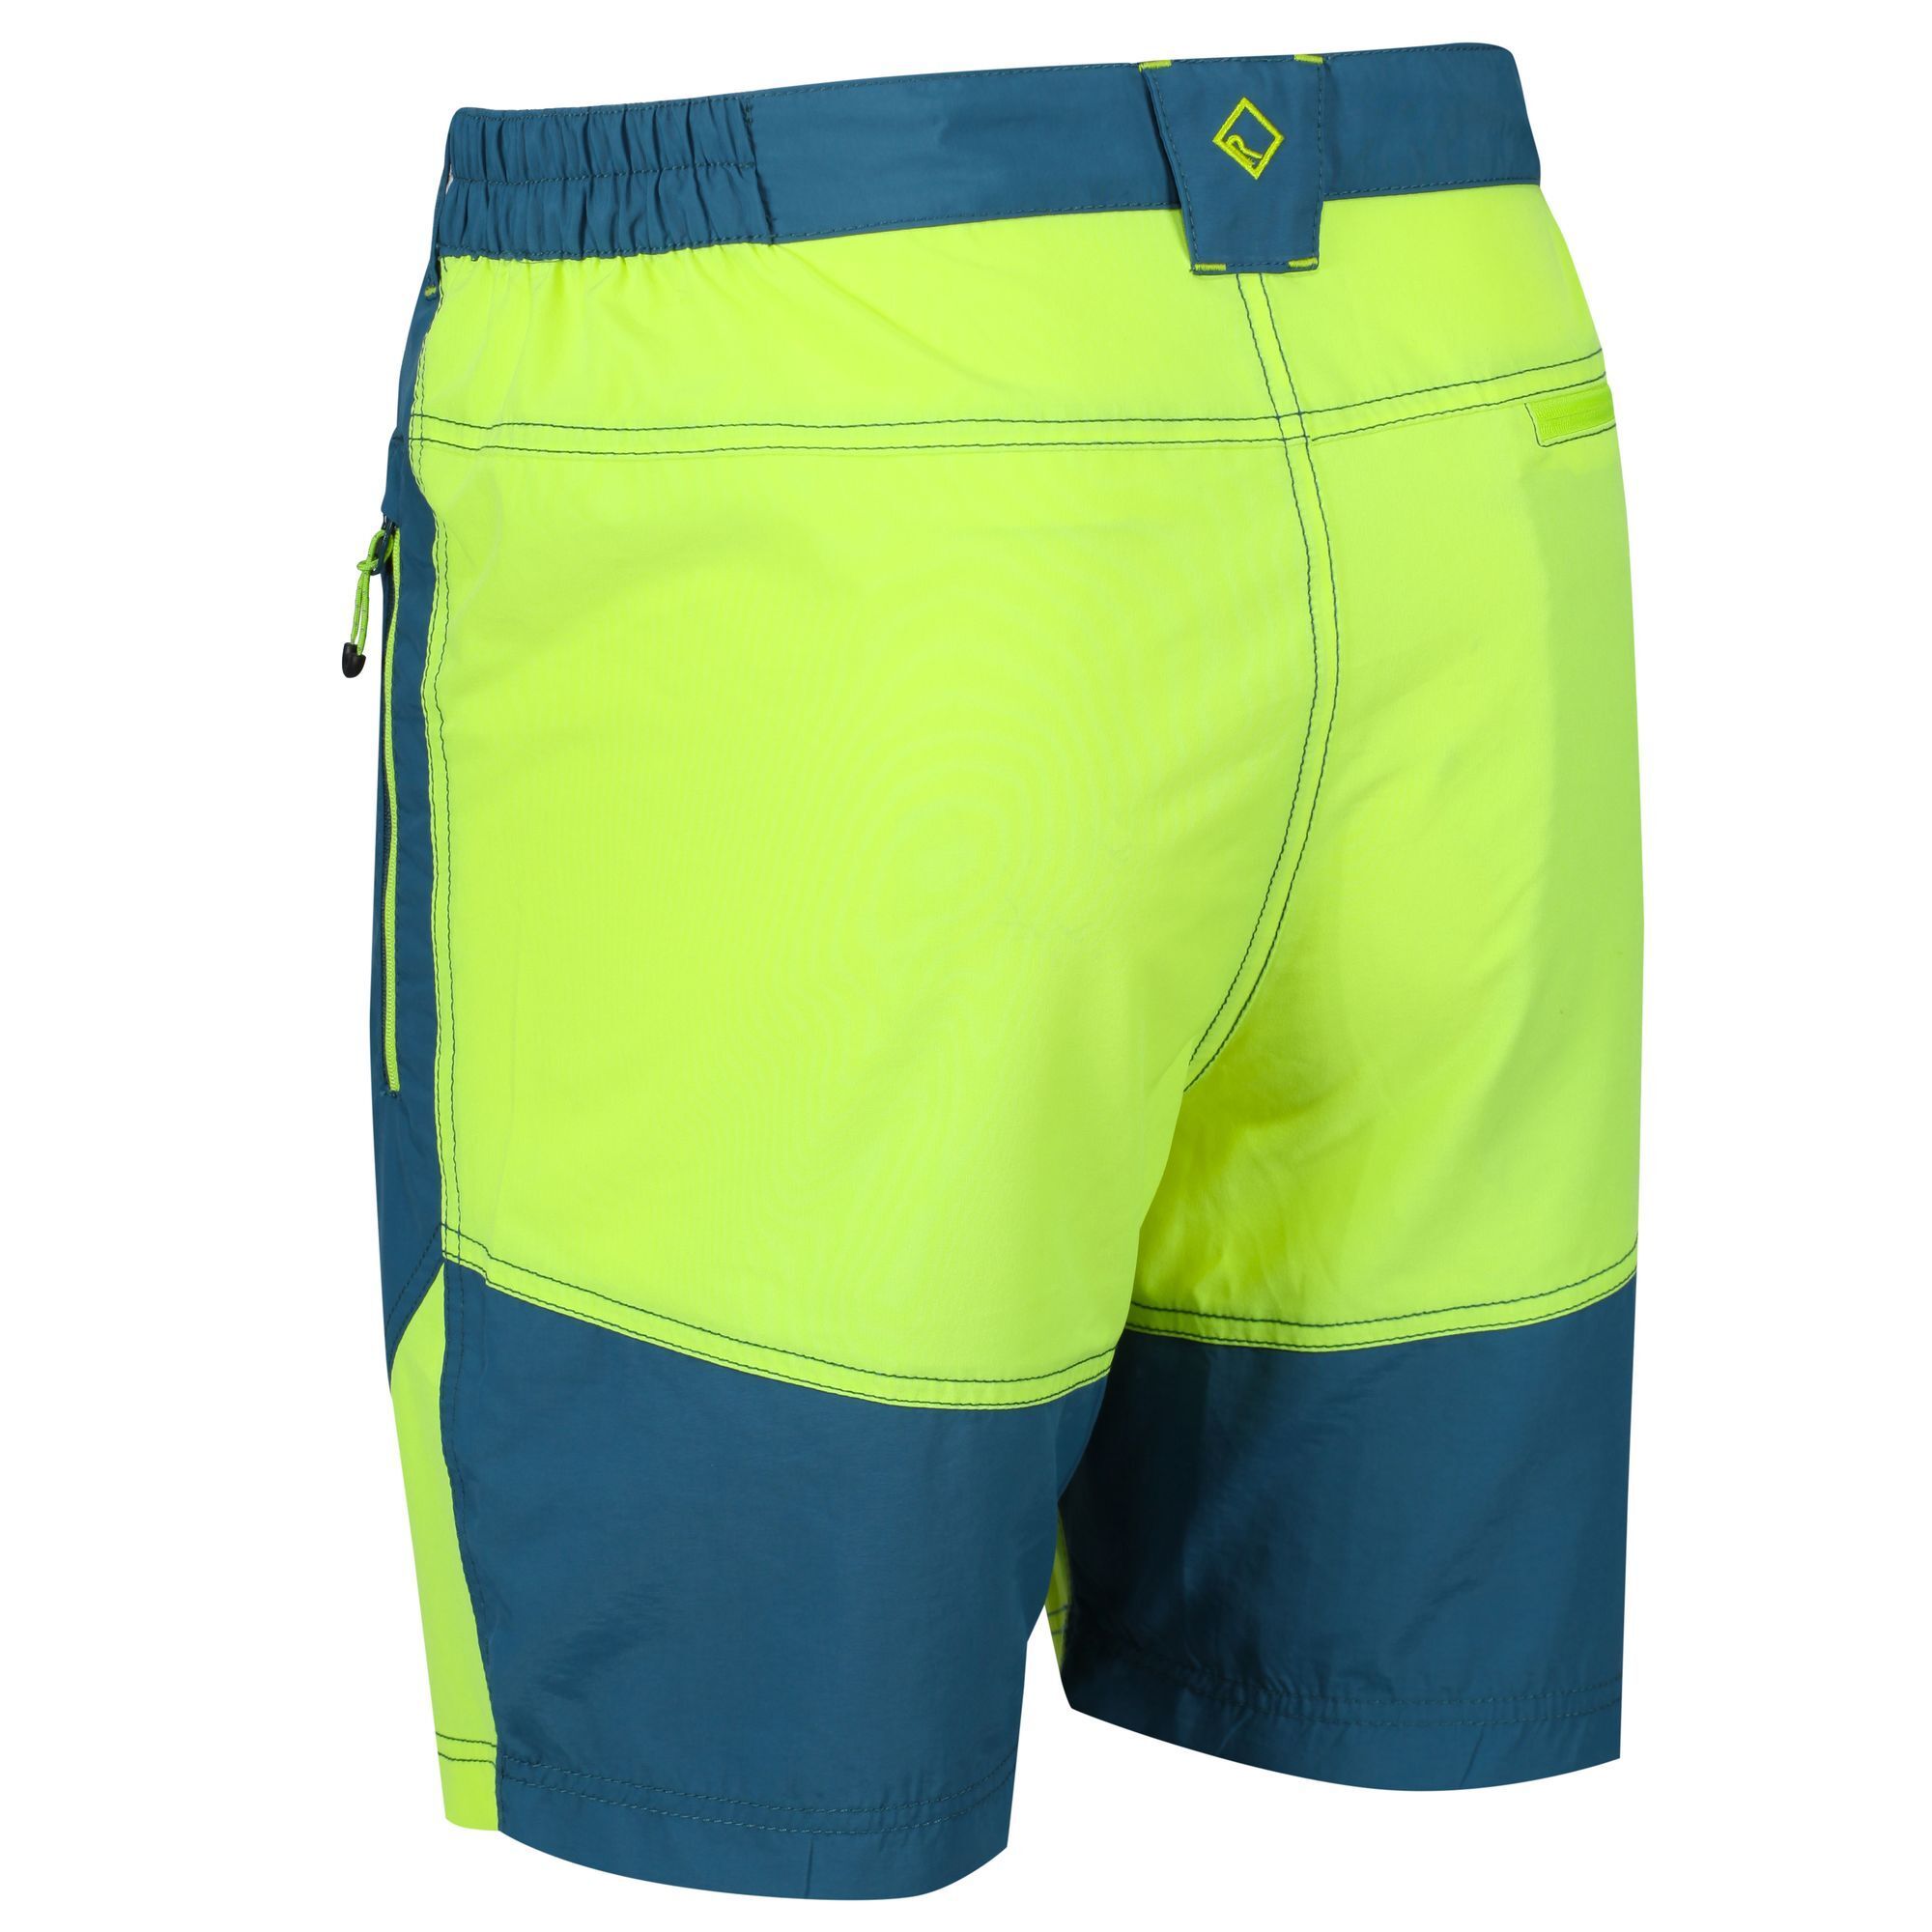 Lightweight shorts made from quick drying stretch fabric for unrestricted movement. DWR water resistant finish. UPF40+ sun protection. Multiple pockets. 100% polyamide. Machine washable.